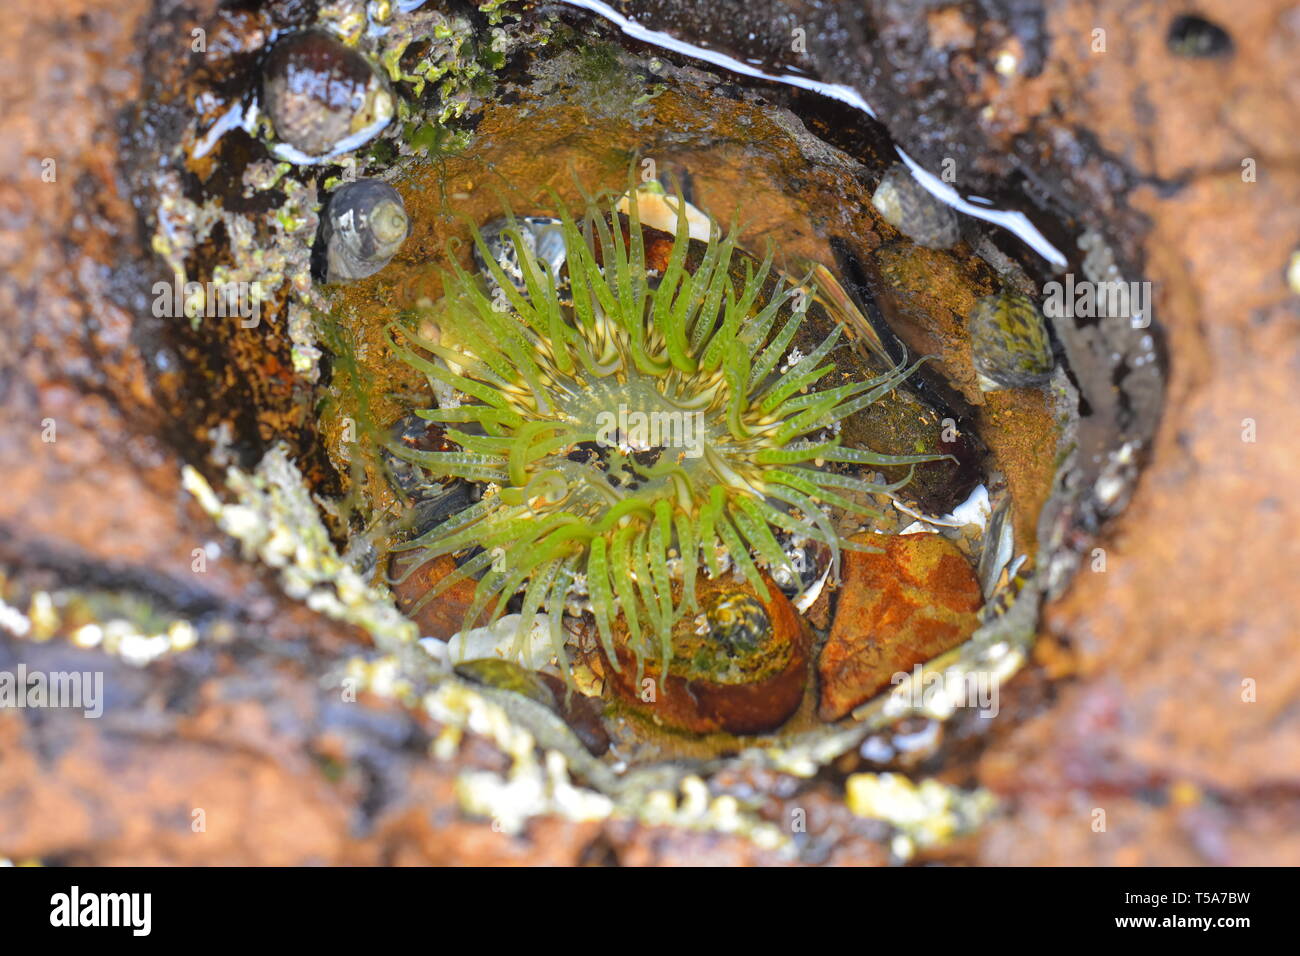 Anemone with bright green tentacles in narrow rock pool at low tide. Stock Photo